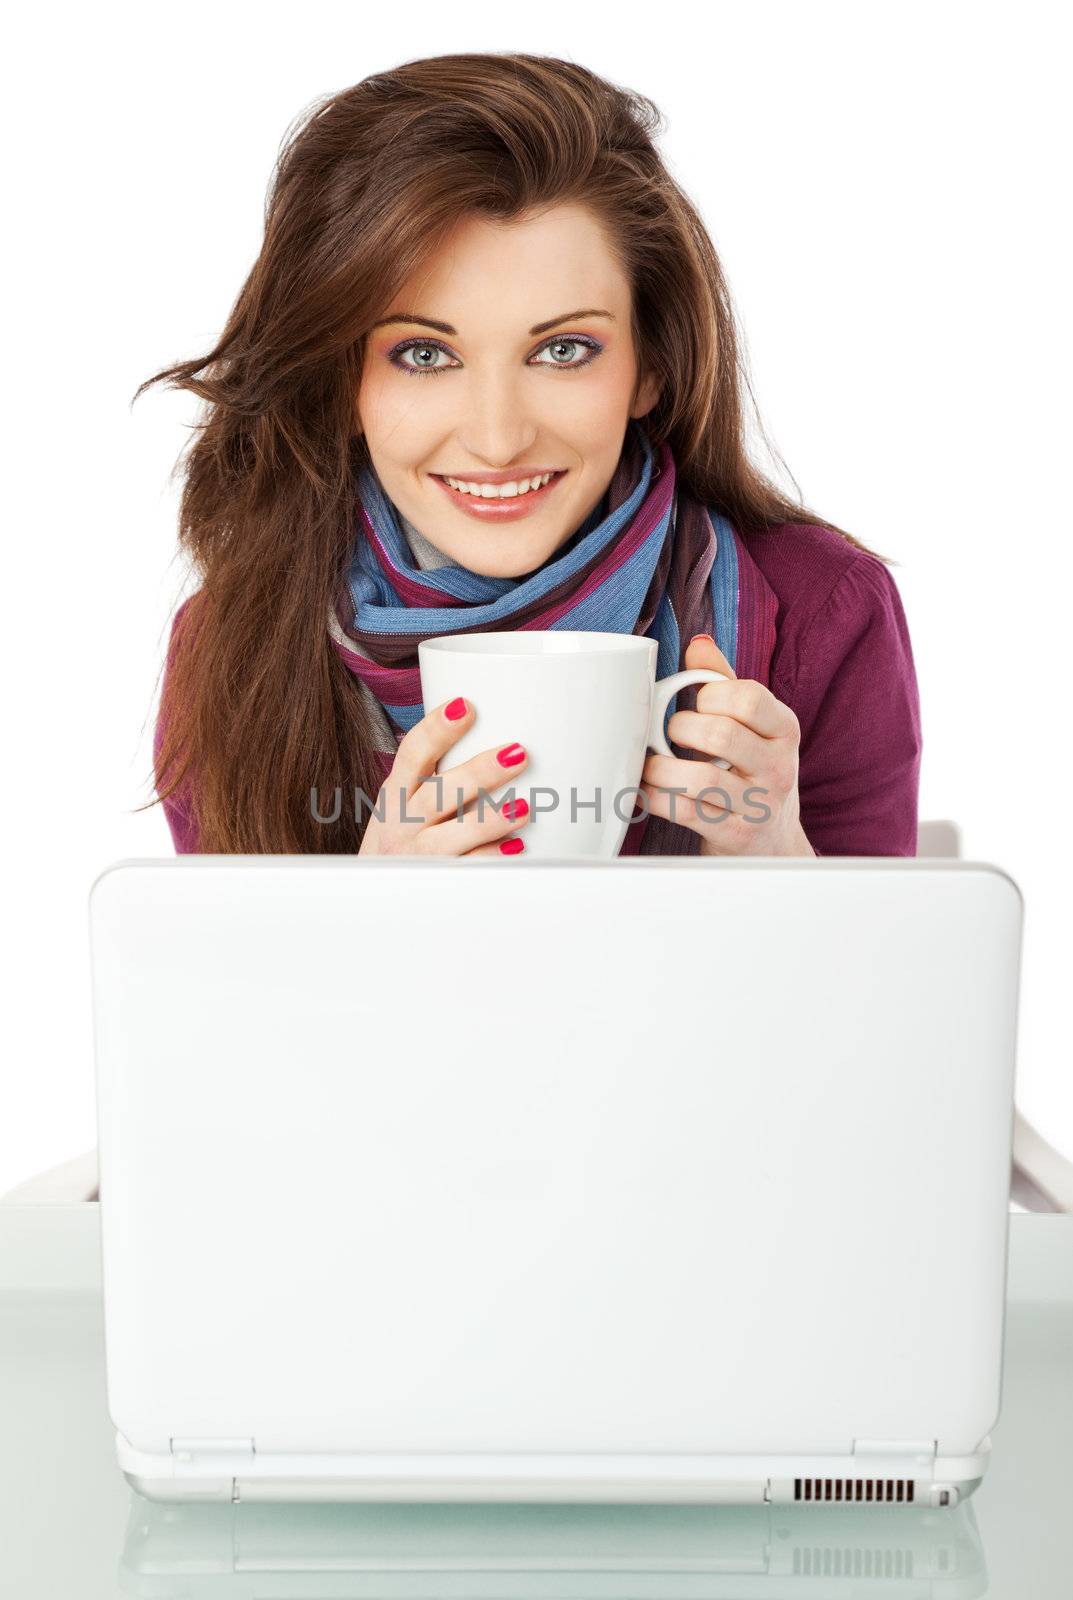 Young beautiful female sitting behind laptop, holding a cup smiling